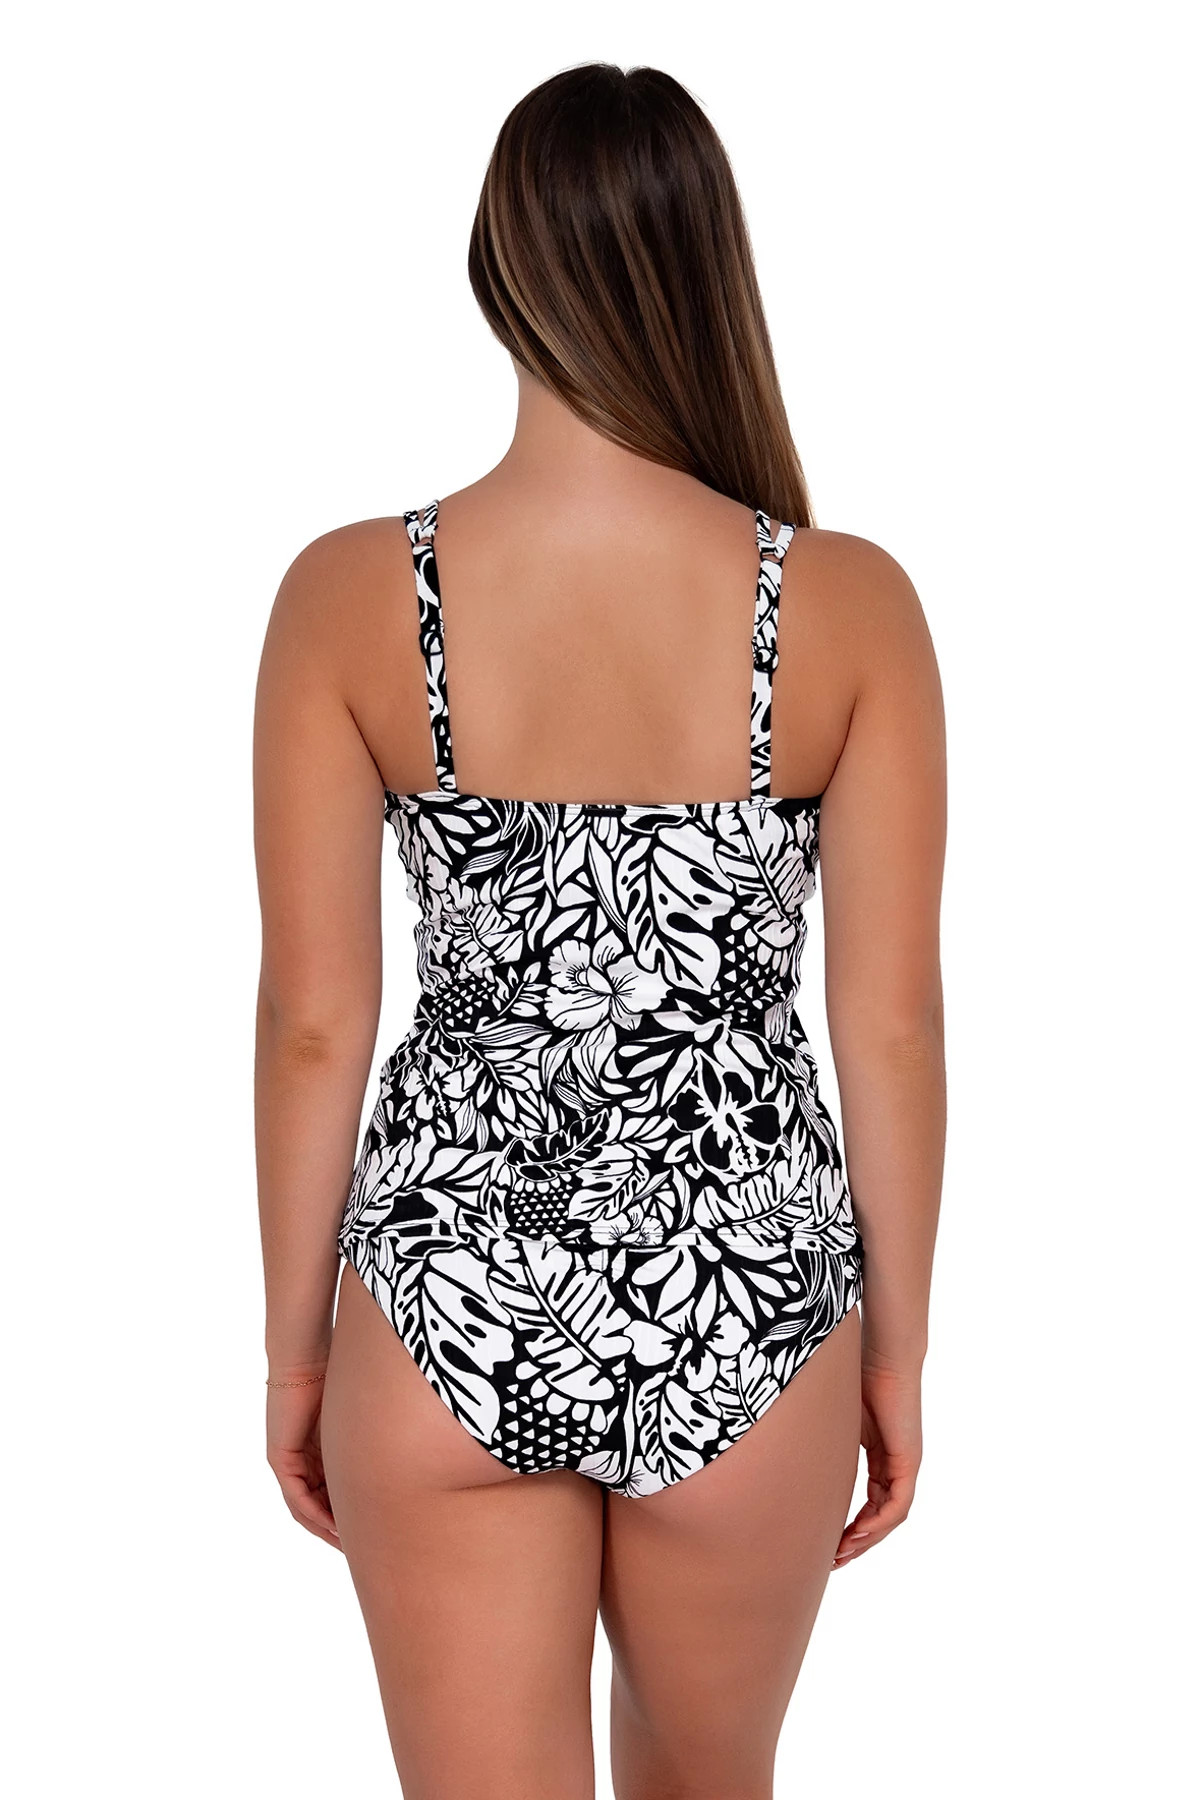 CARIBBEAN SEAGRASS TEXTURE Taylor Underwire Tankini Top (D+ Cup) image number 2